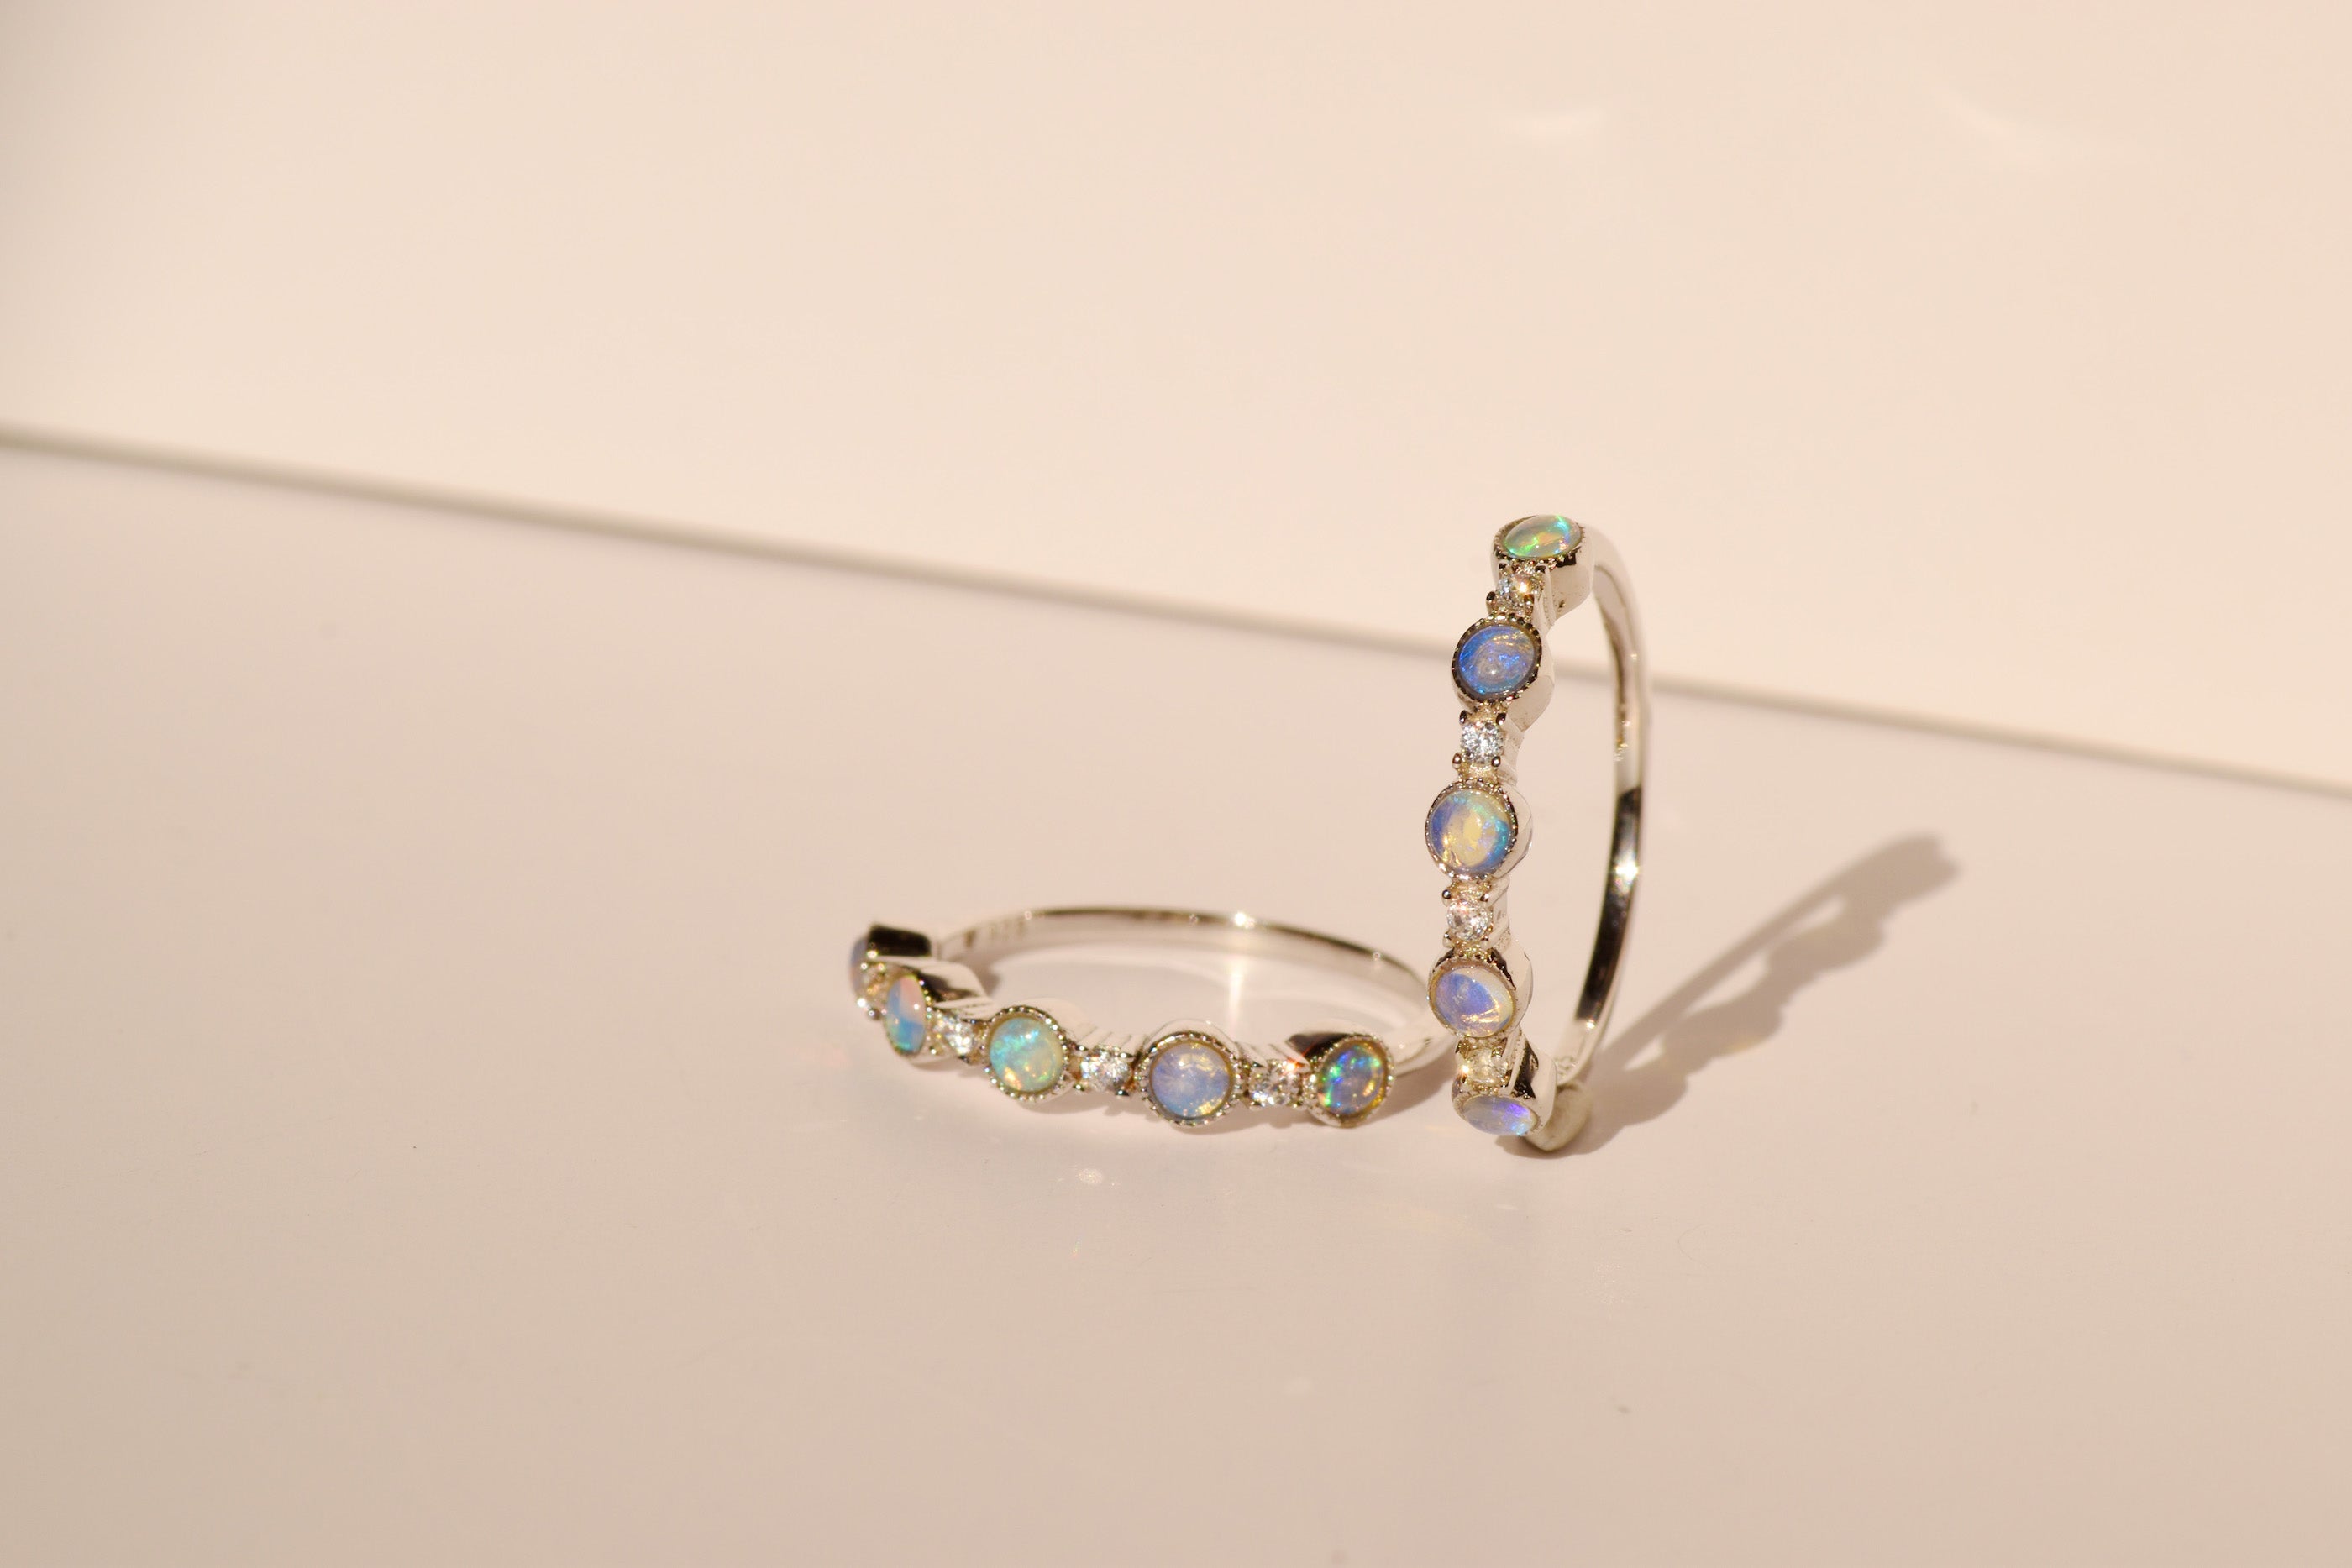 Michelle Yuen Jewelry's Round Band Ring - Blue uses Australian violet opal / blue opal